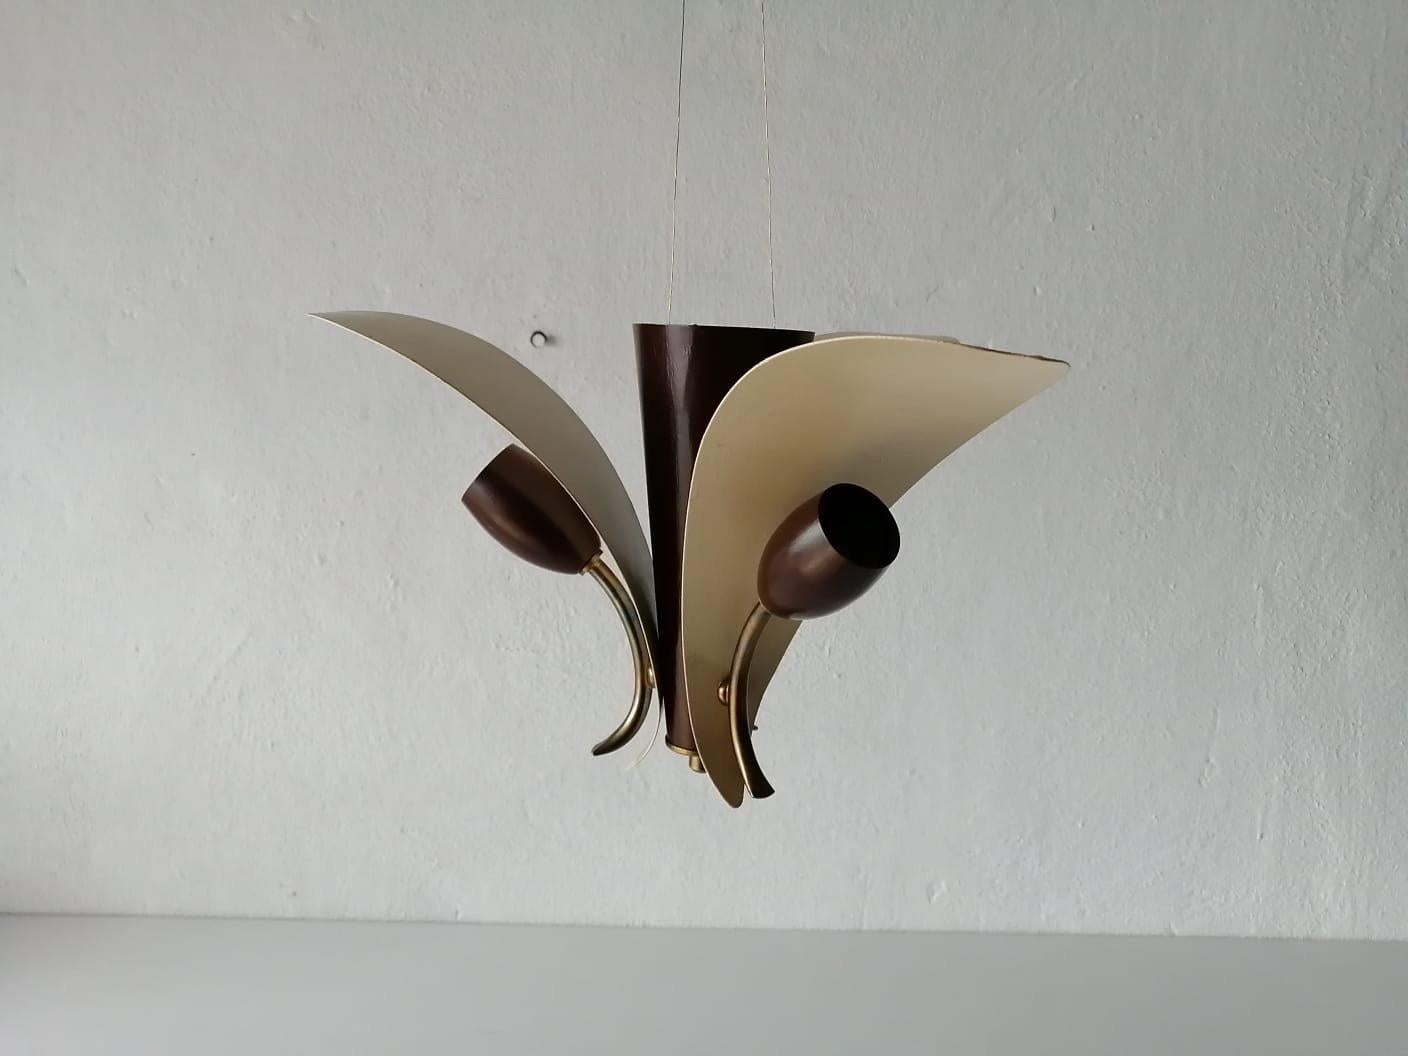 Mid-Century Modern 3 armed white & brown flower design sputnik flush mount or ceiling lamp, 1950s Germany

Very elegant and rare design.

It is very ideal and suitable for all living areas.

Lamp is in good condition. No damage, no